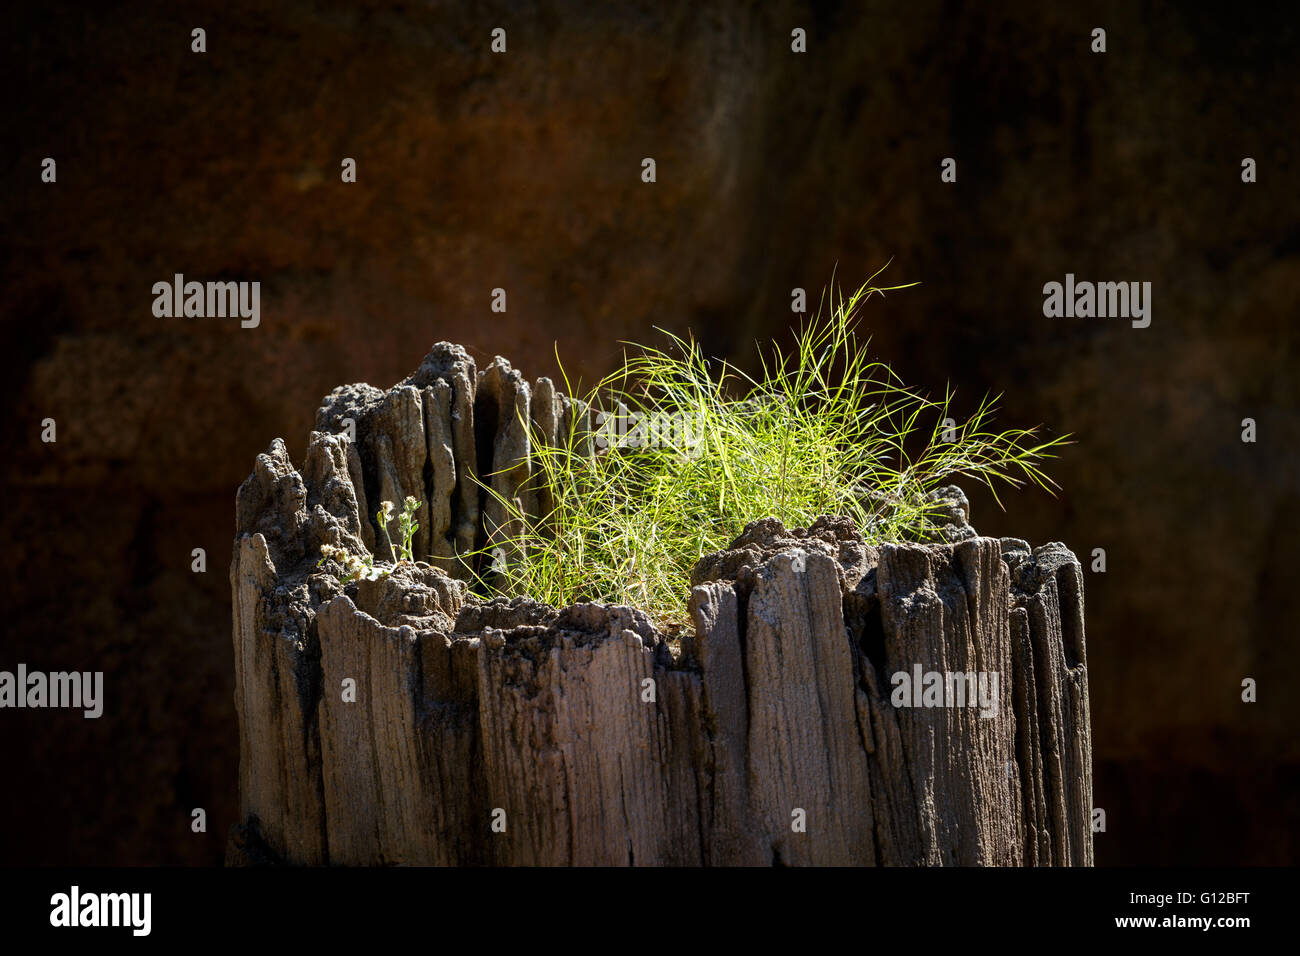 Grass on dried death tree Stock Photo